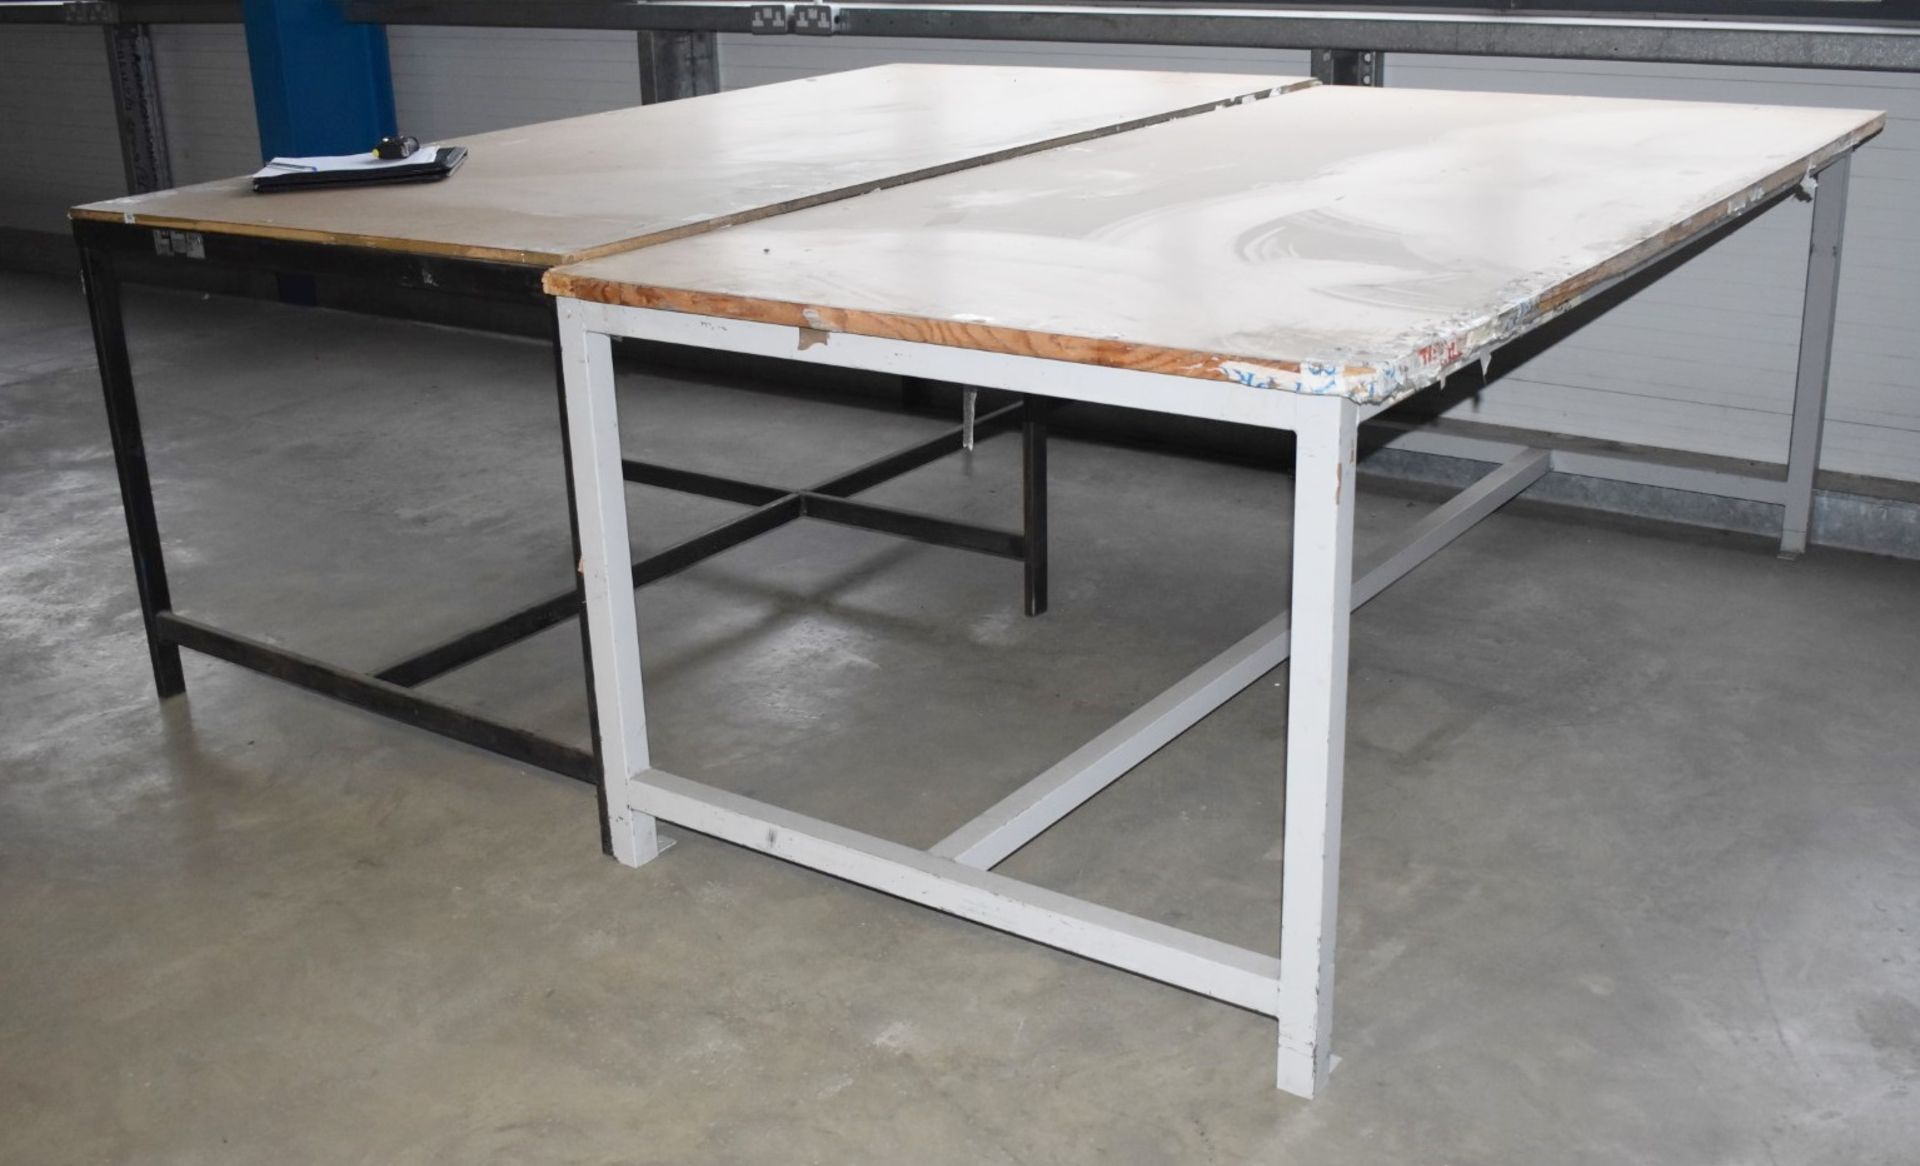 2 x Workbenches With Metal Frames - Size: 120 x 240cm - Ref FE258 - CL480 - Location: Nottingham